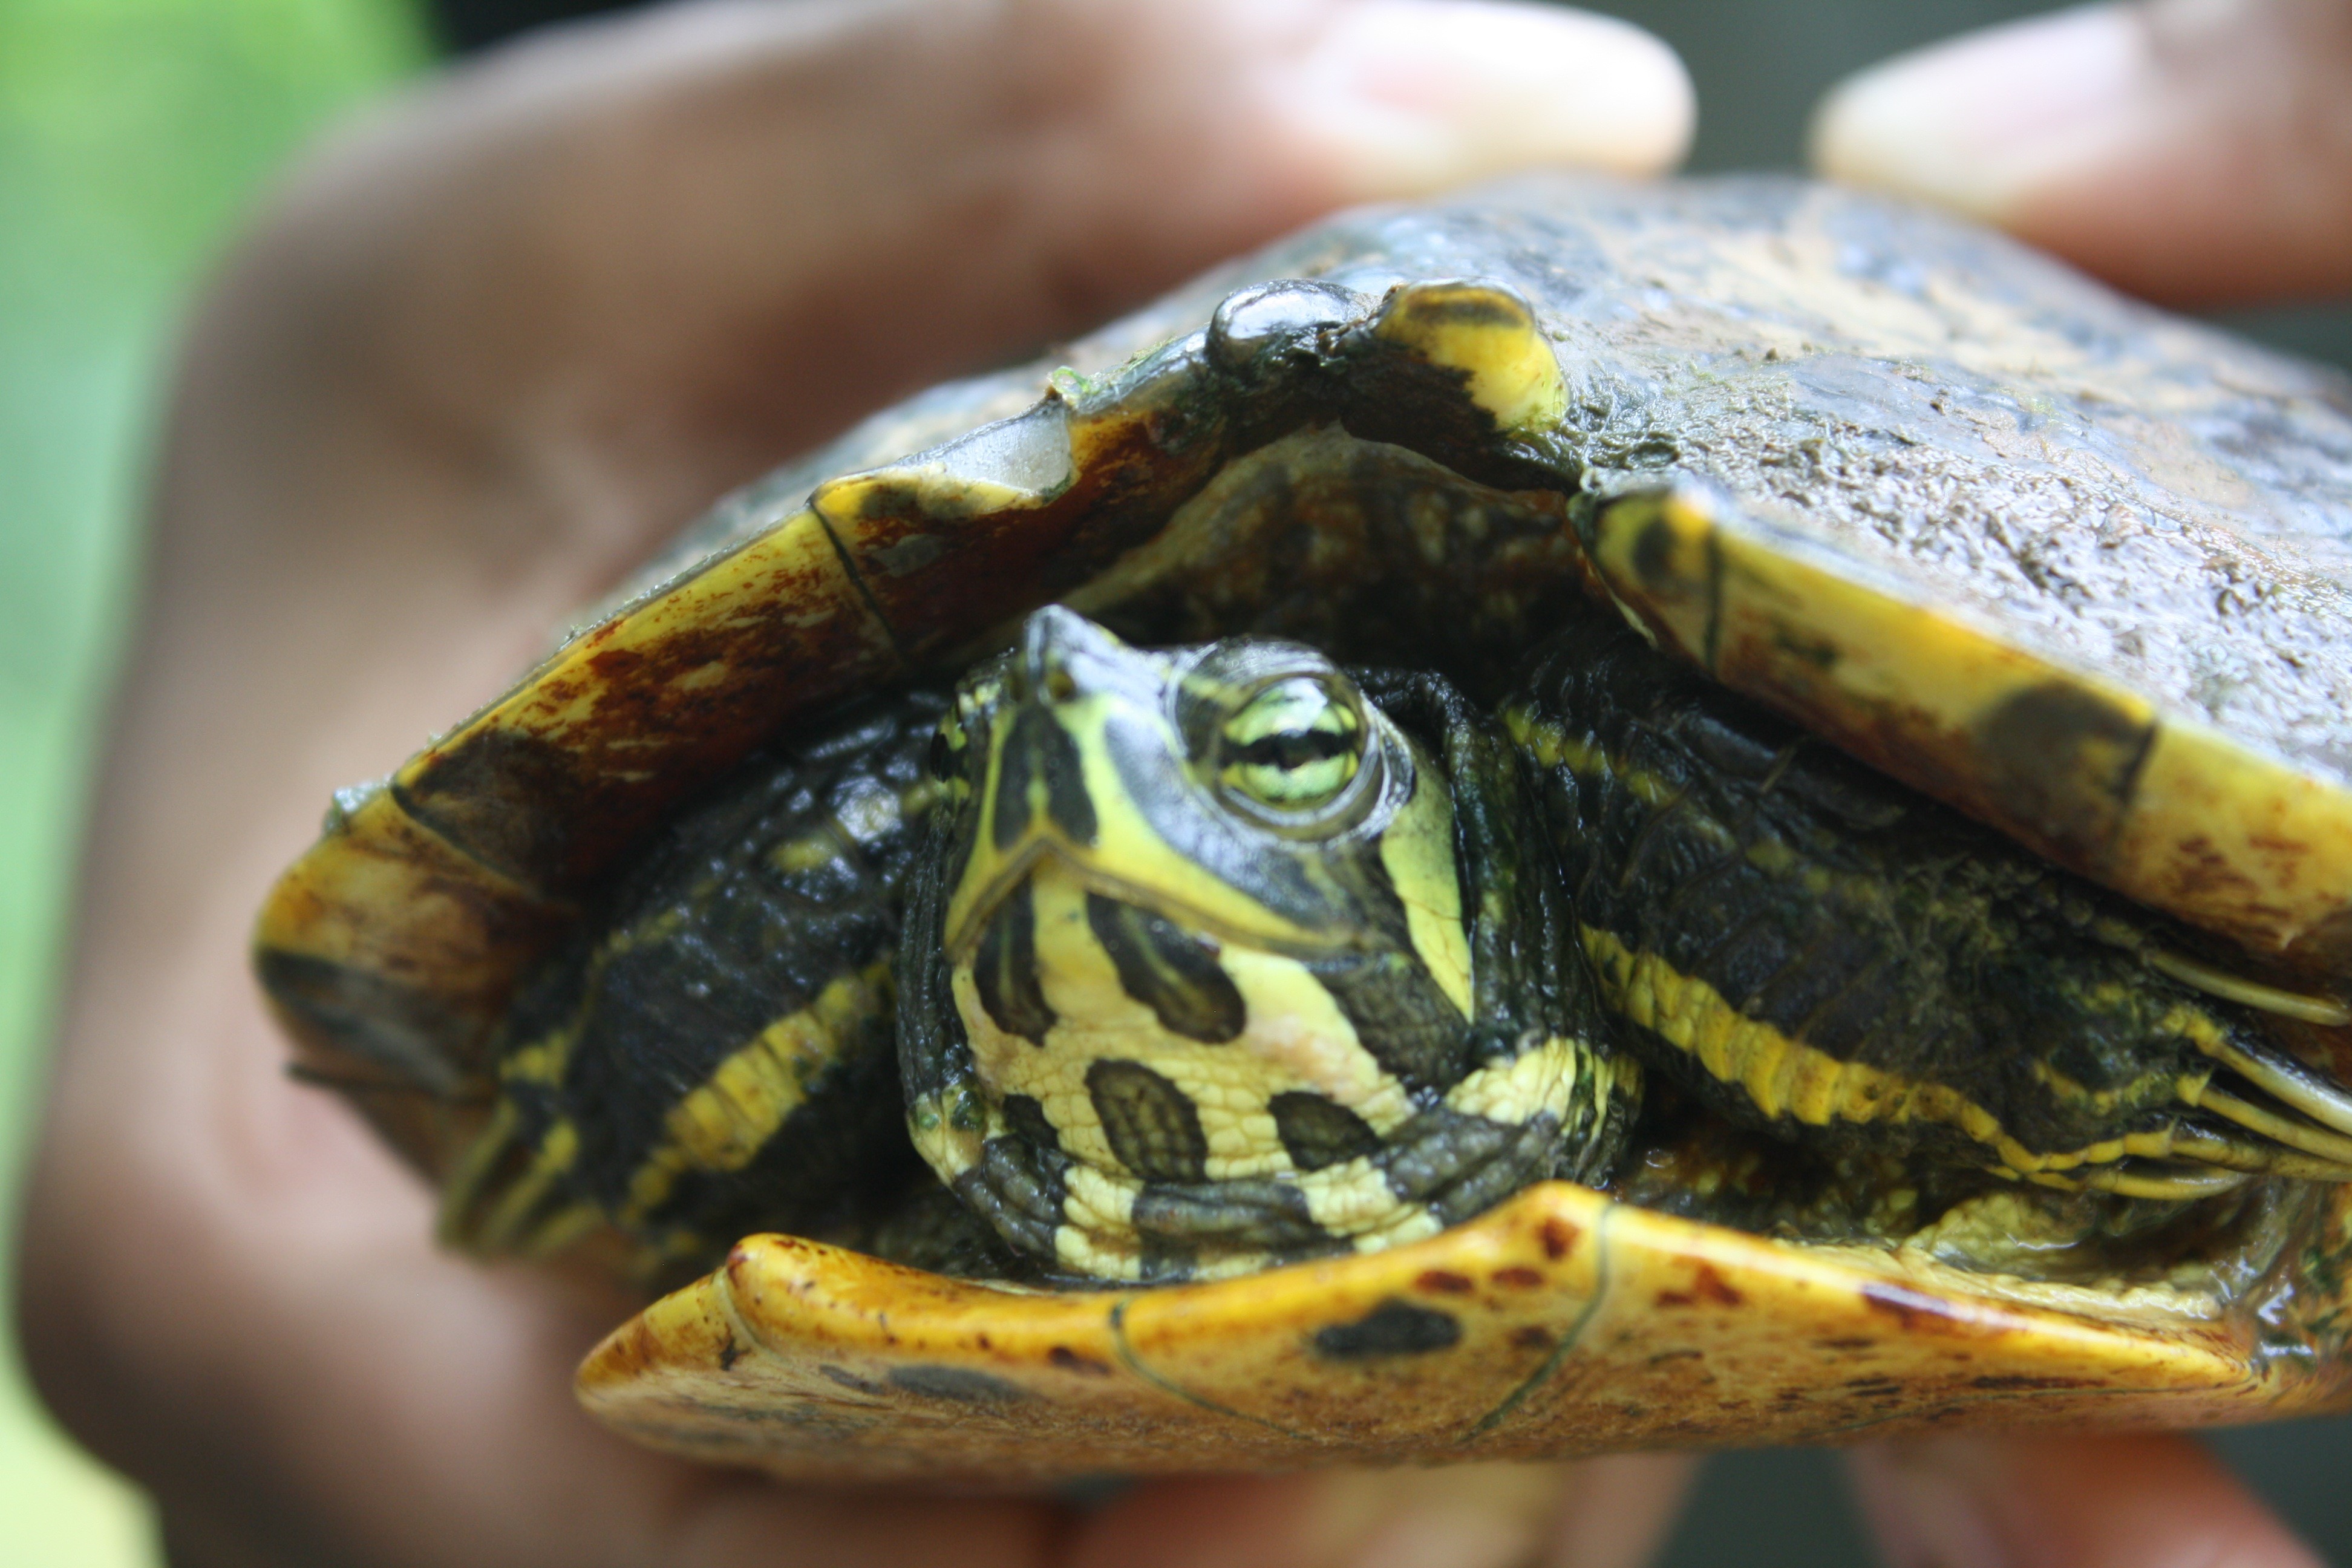 In Awe of Nature: Amazing Aquatic Turtles – The Herp Project